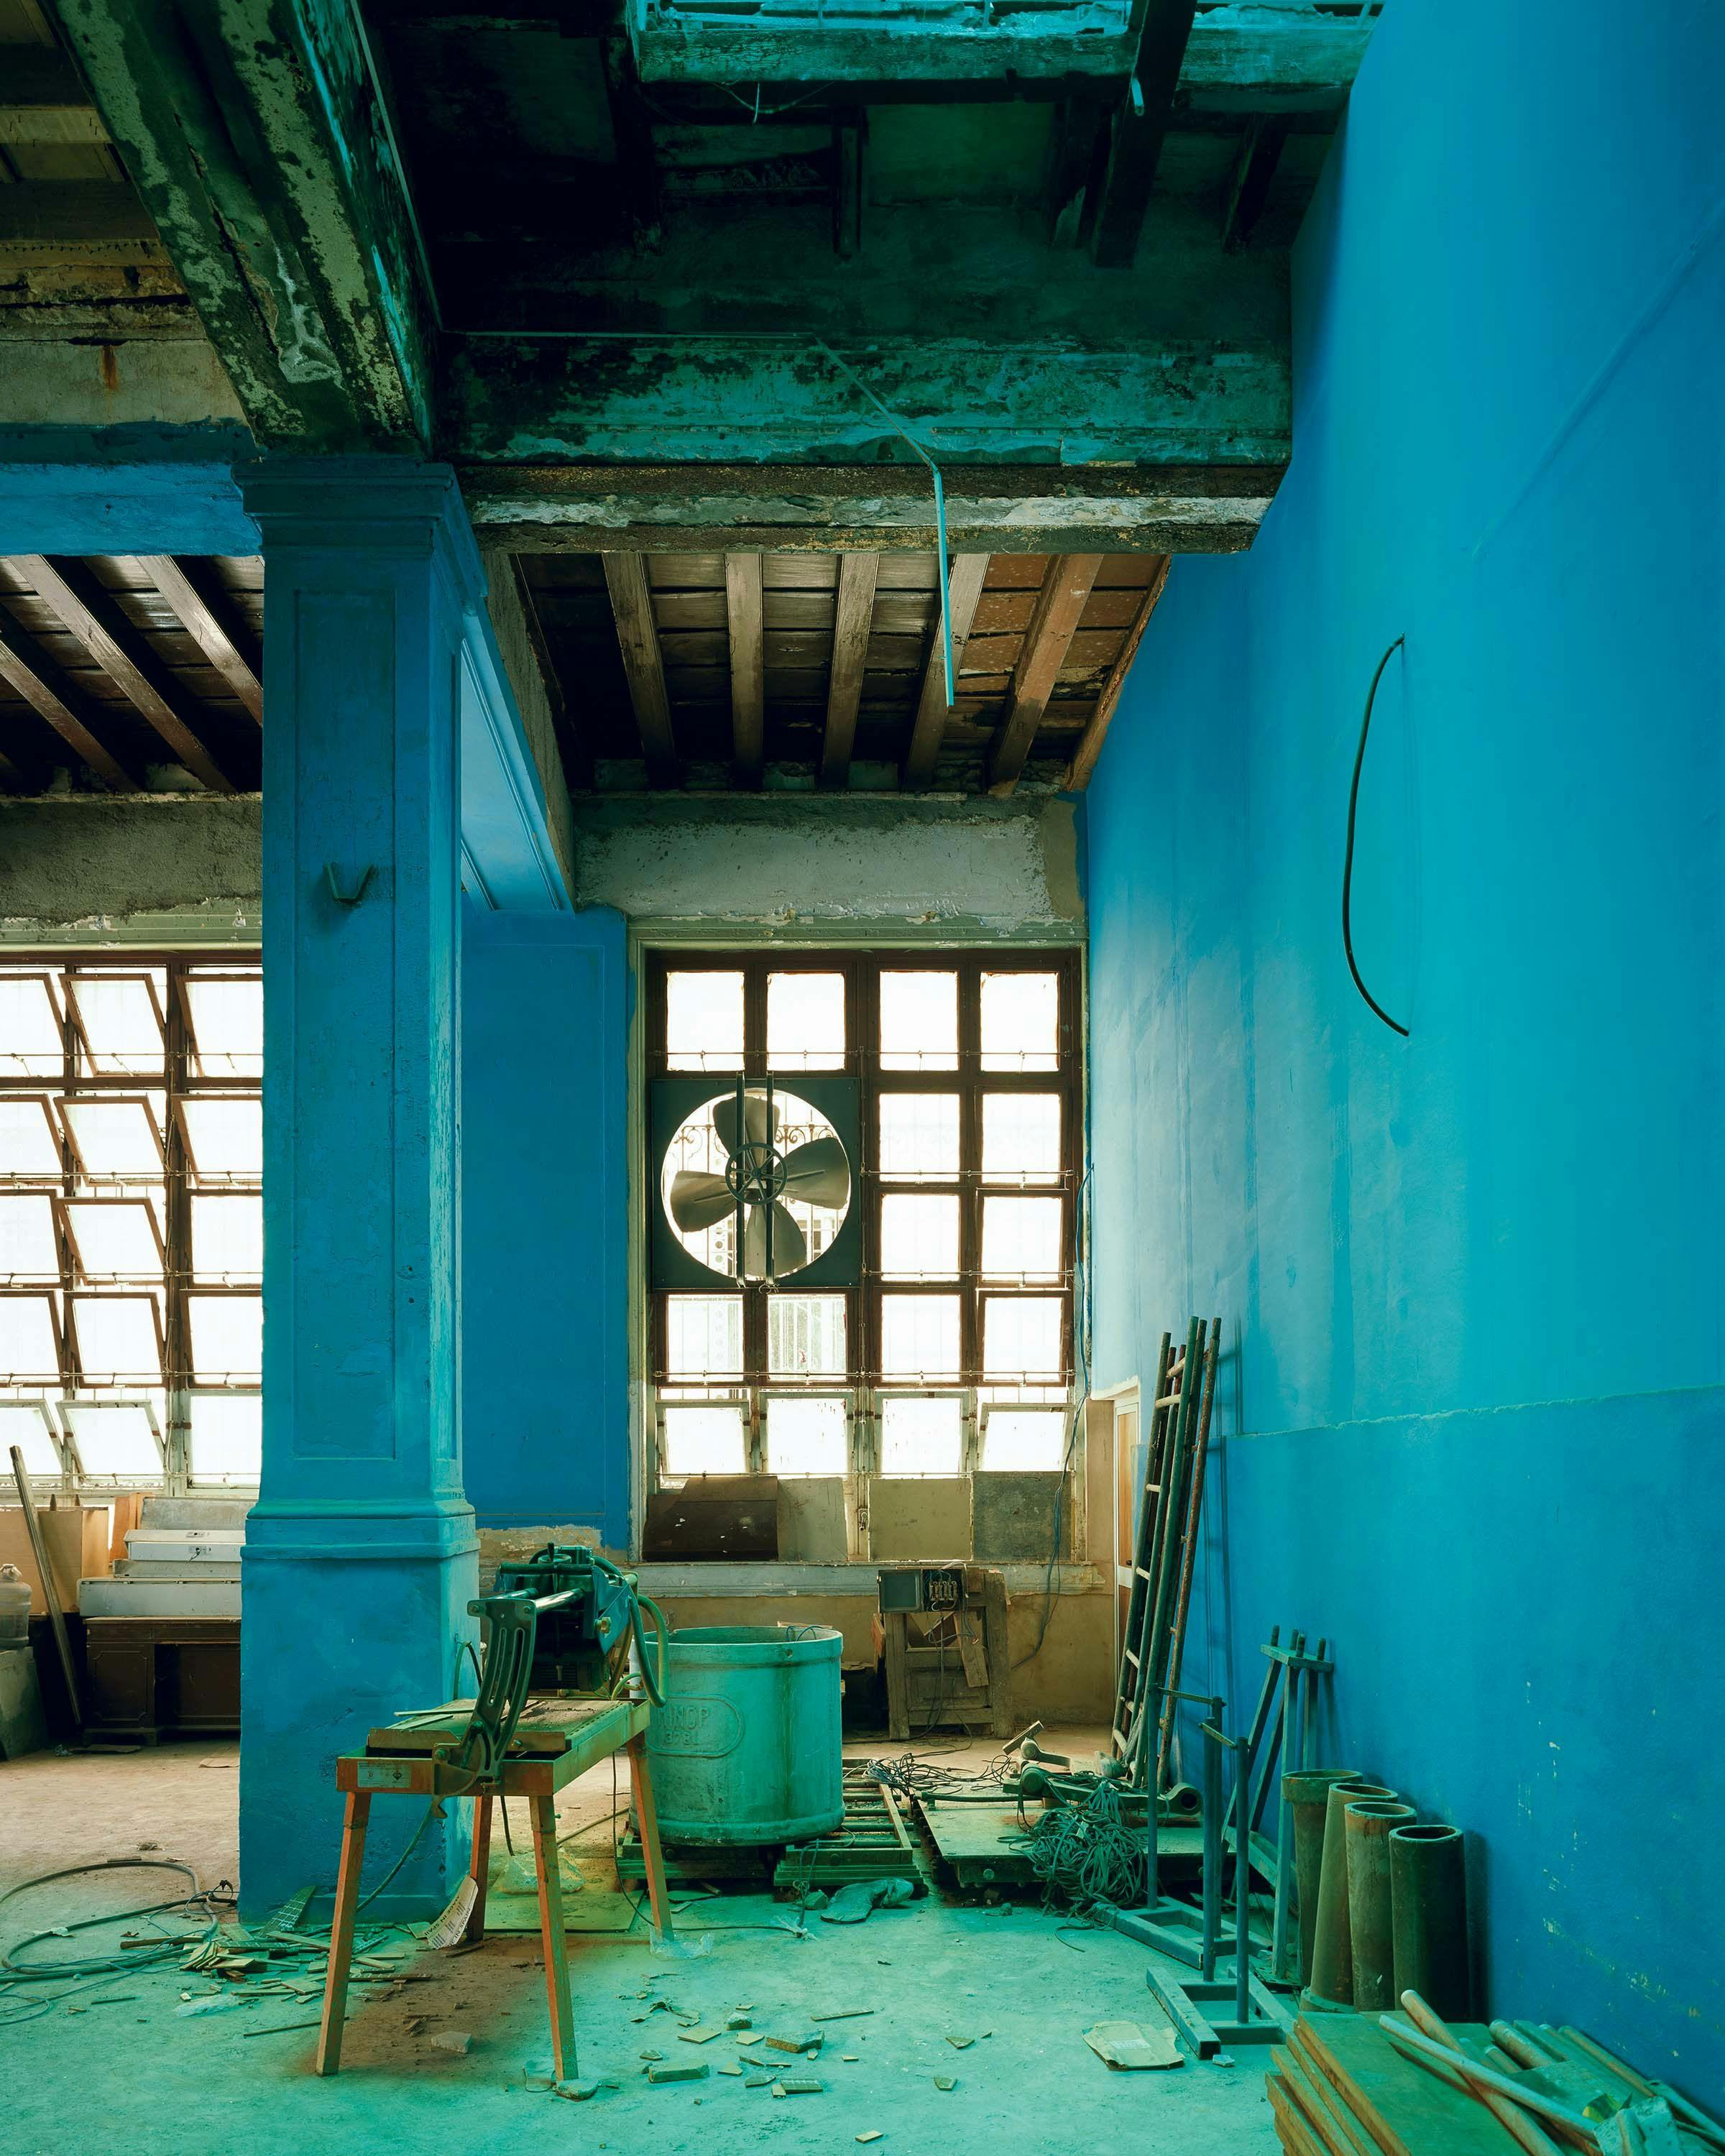 A photograph by Stan Douglas, titled Bank / Cafeteria, Habana Vieja, dated 2004.